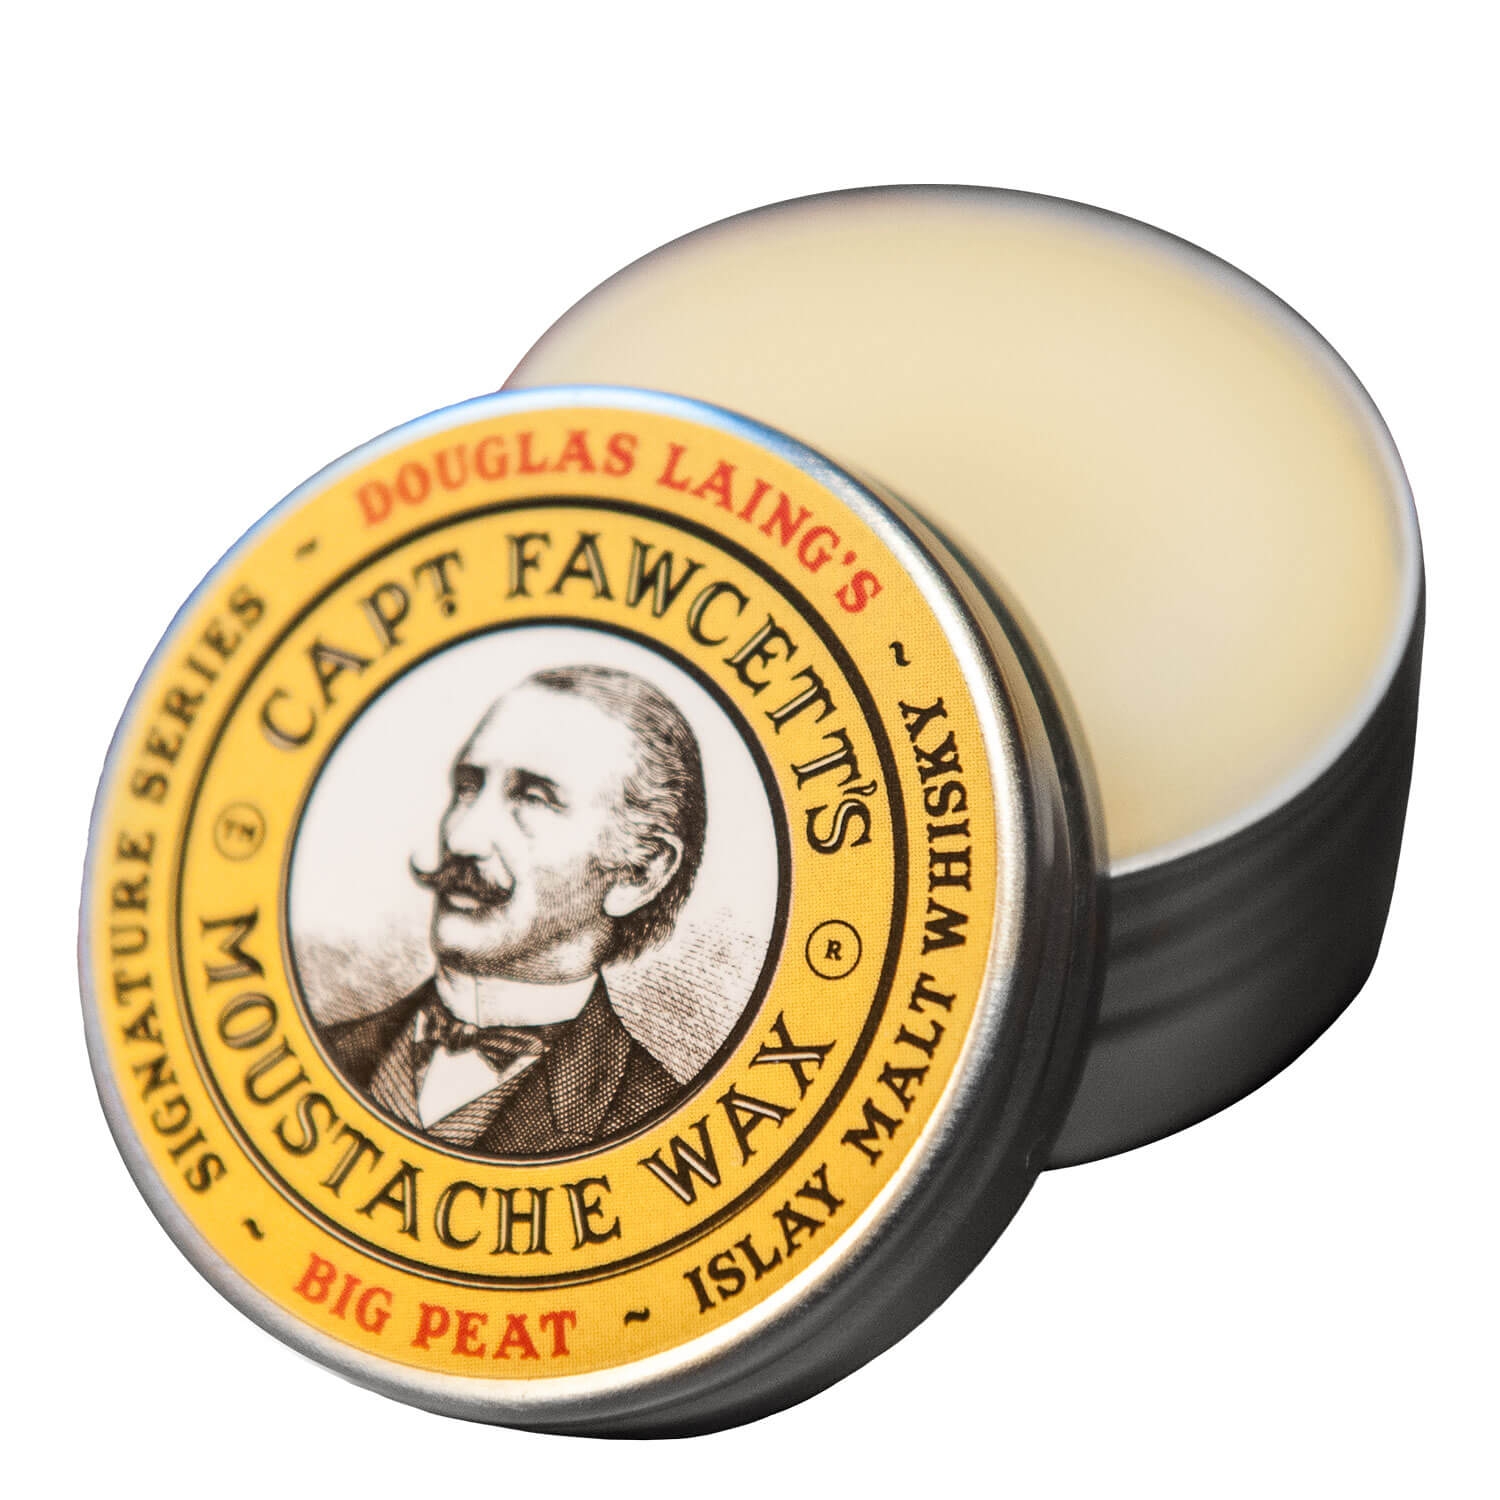 Product image from Capt. Fawcett Care - Big Peat Islay Malt Whisky Moustache Wax